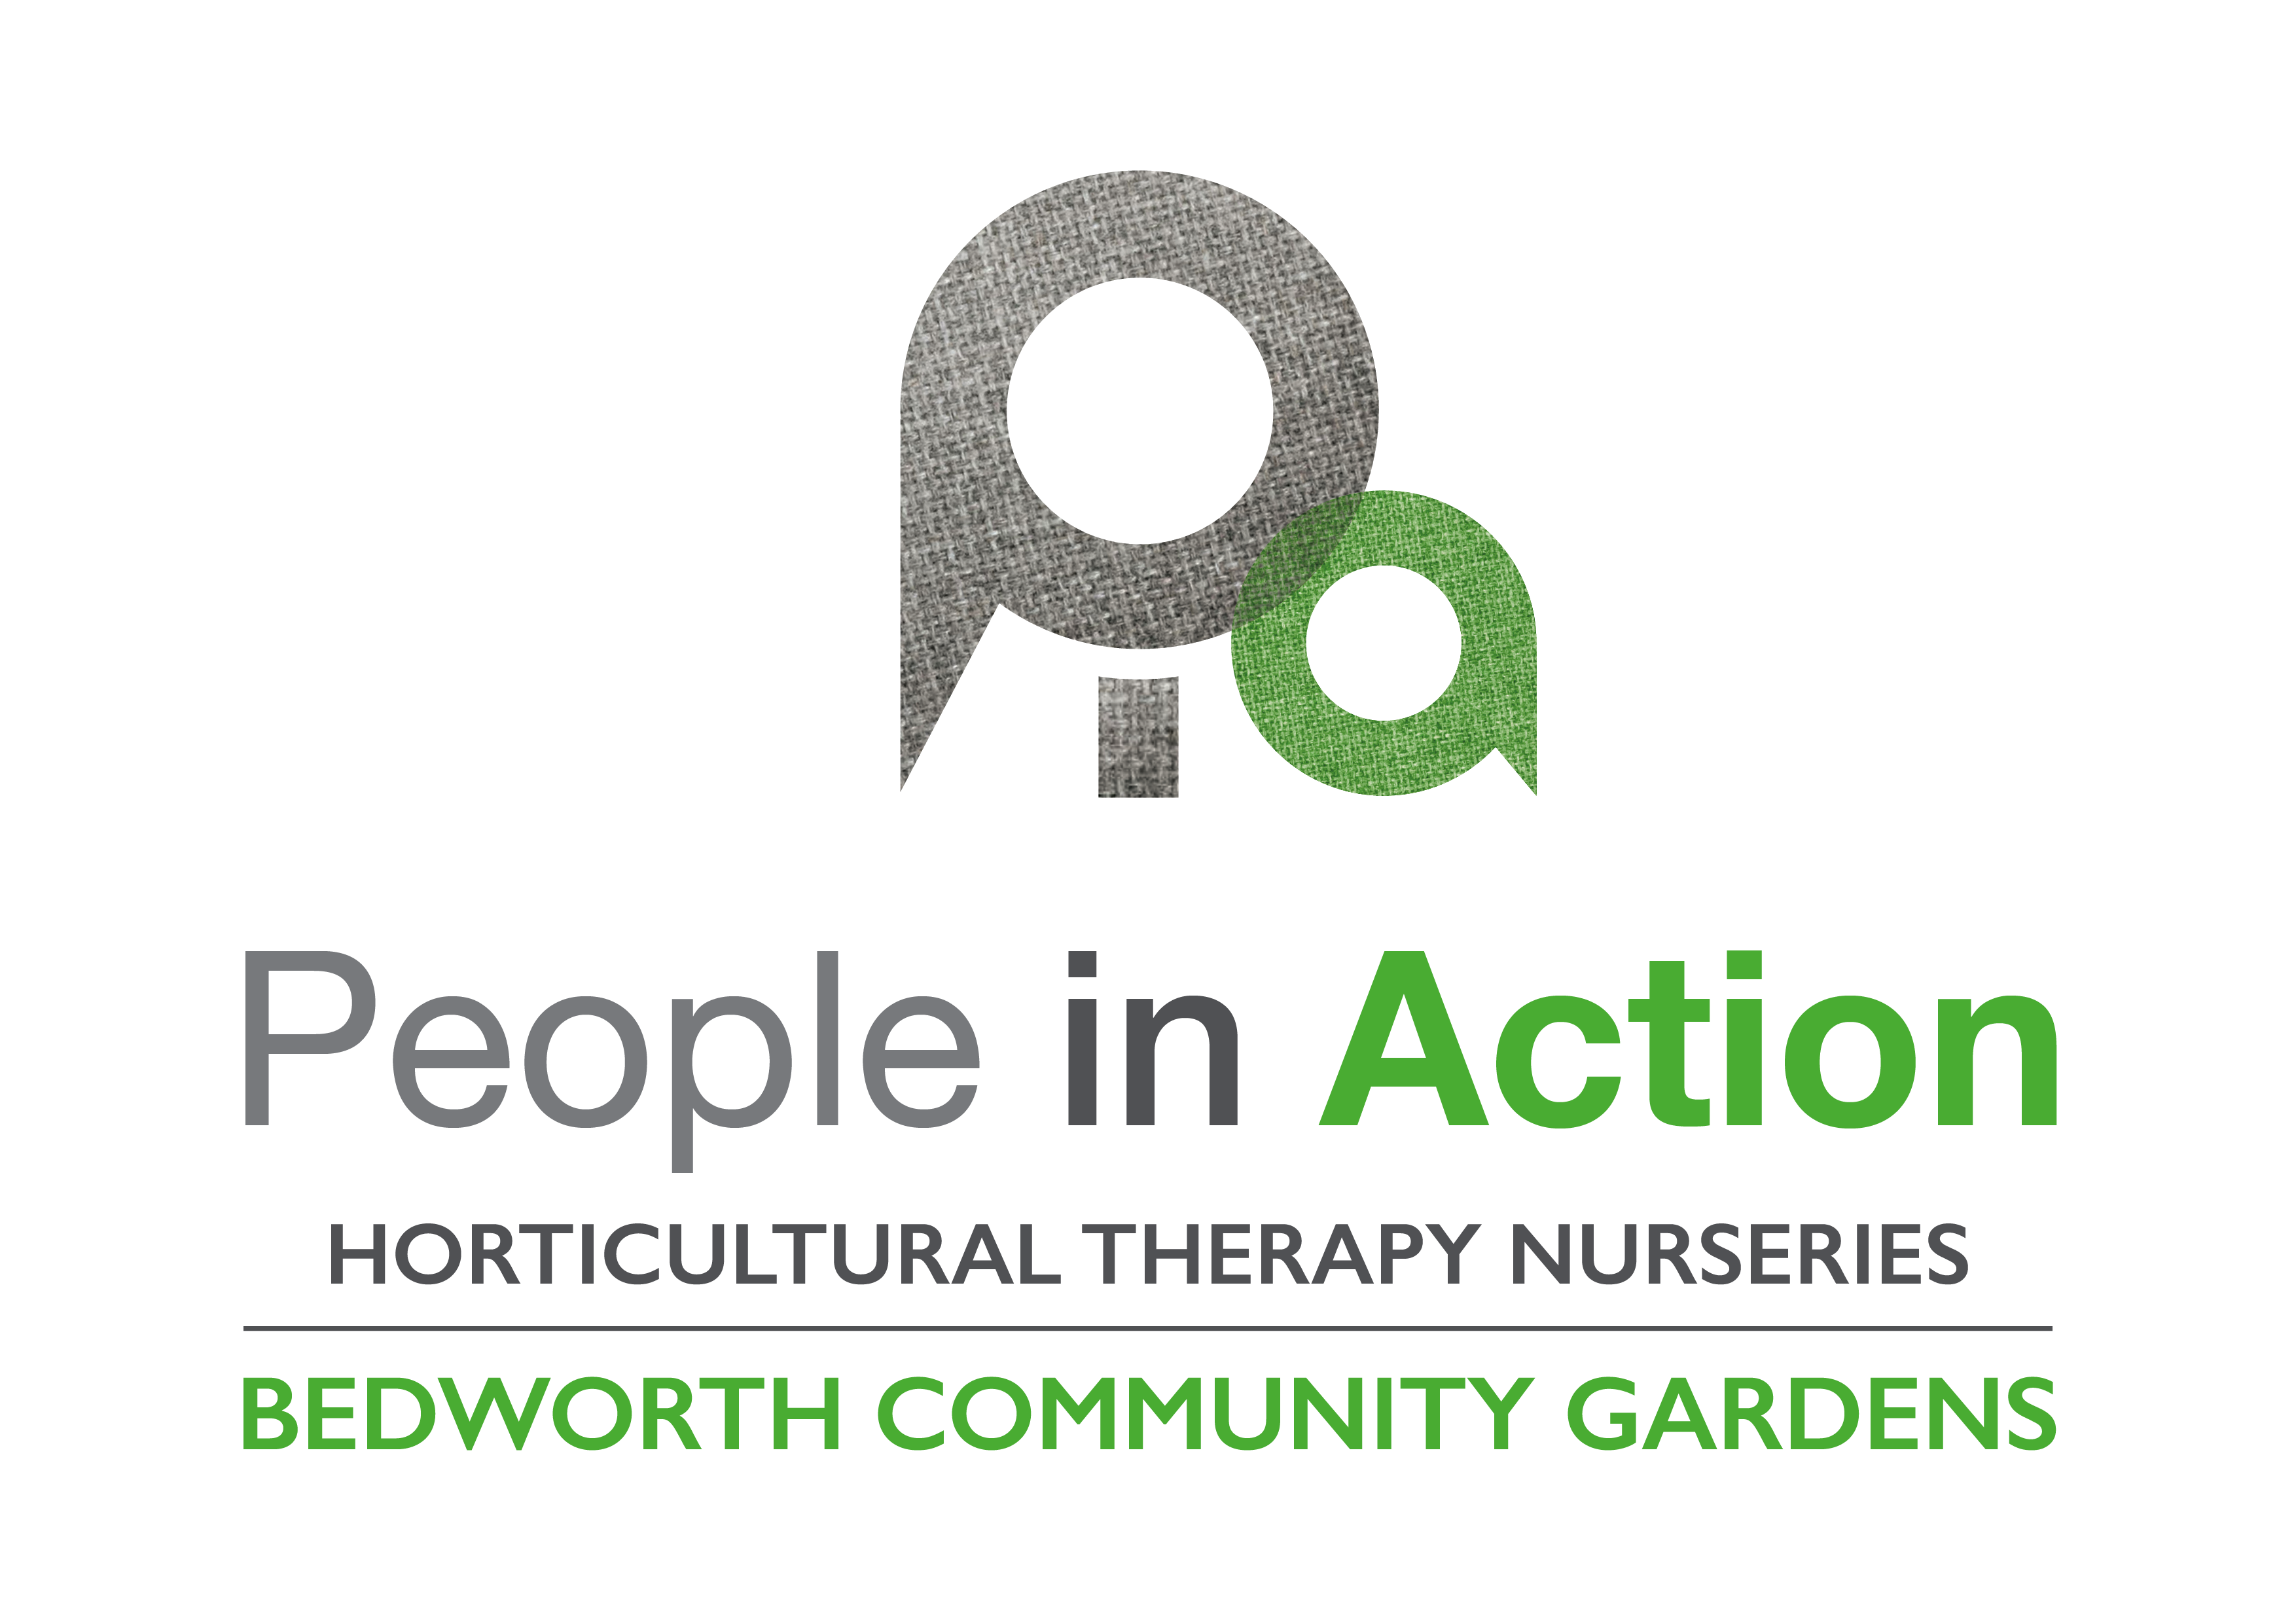 People in Action - Bedworth Community Gardens Logo